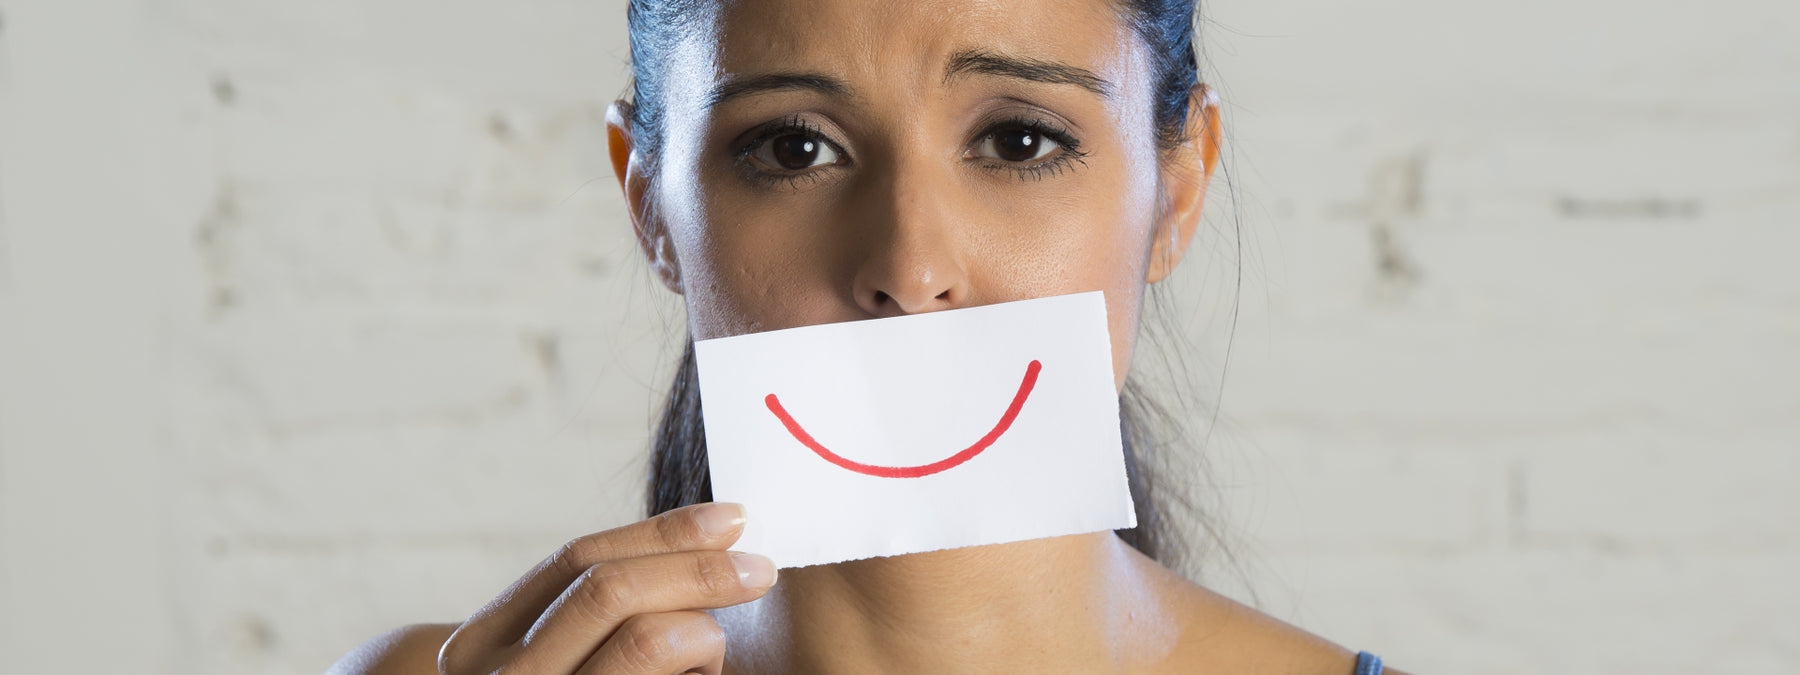 What is “Smiling Depression” and Why is it Dangerous?